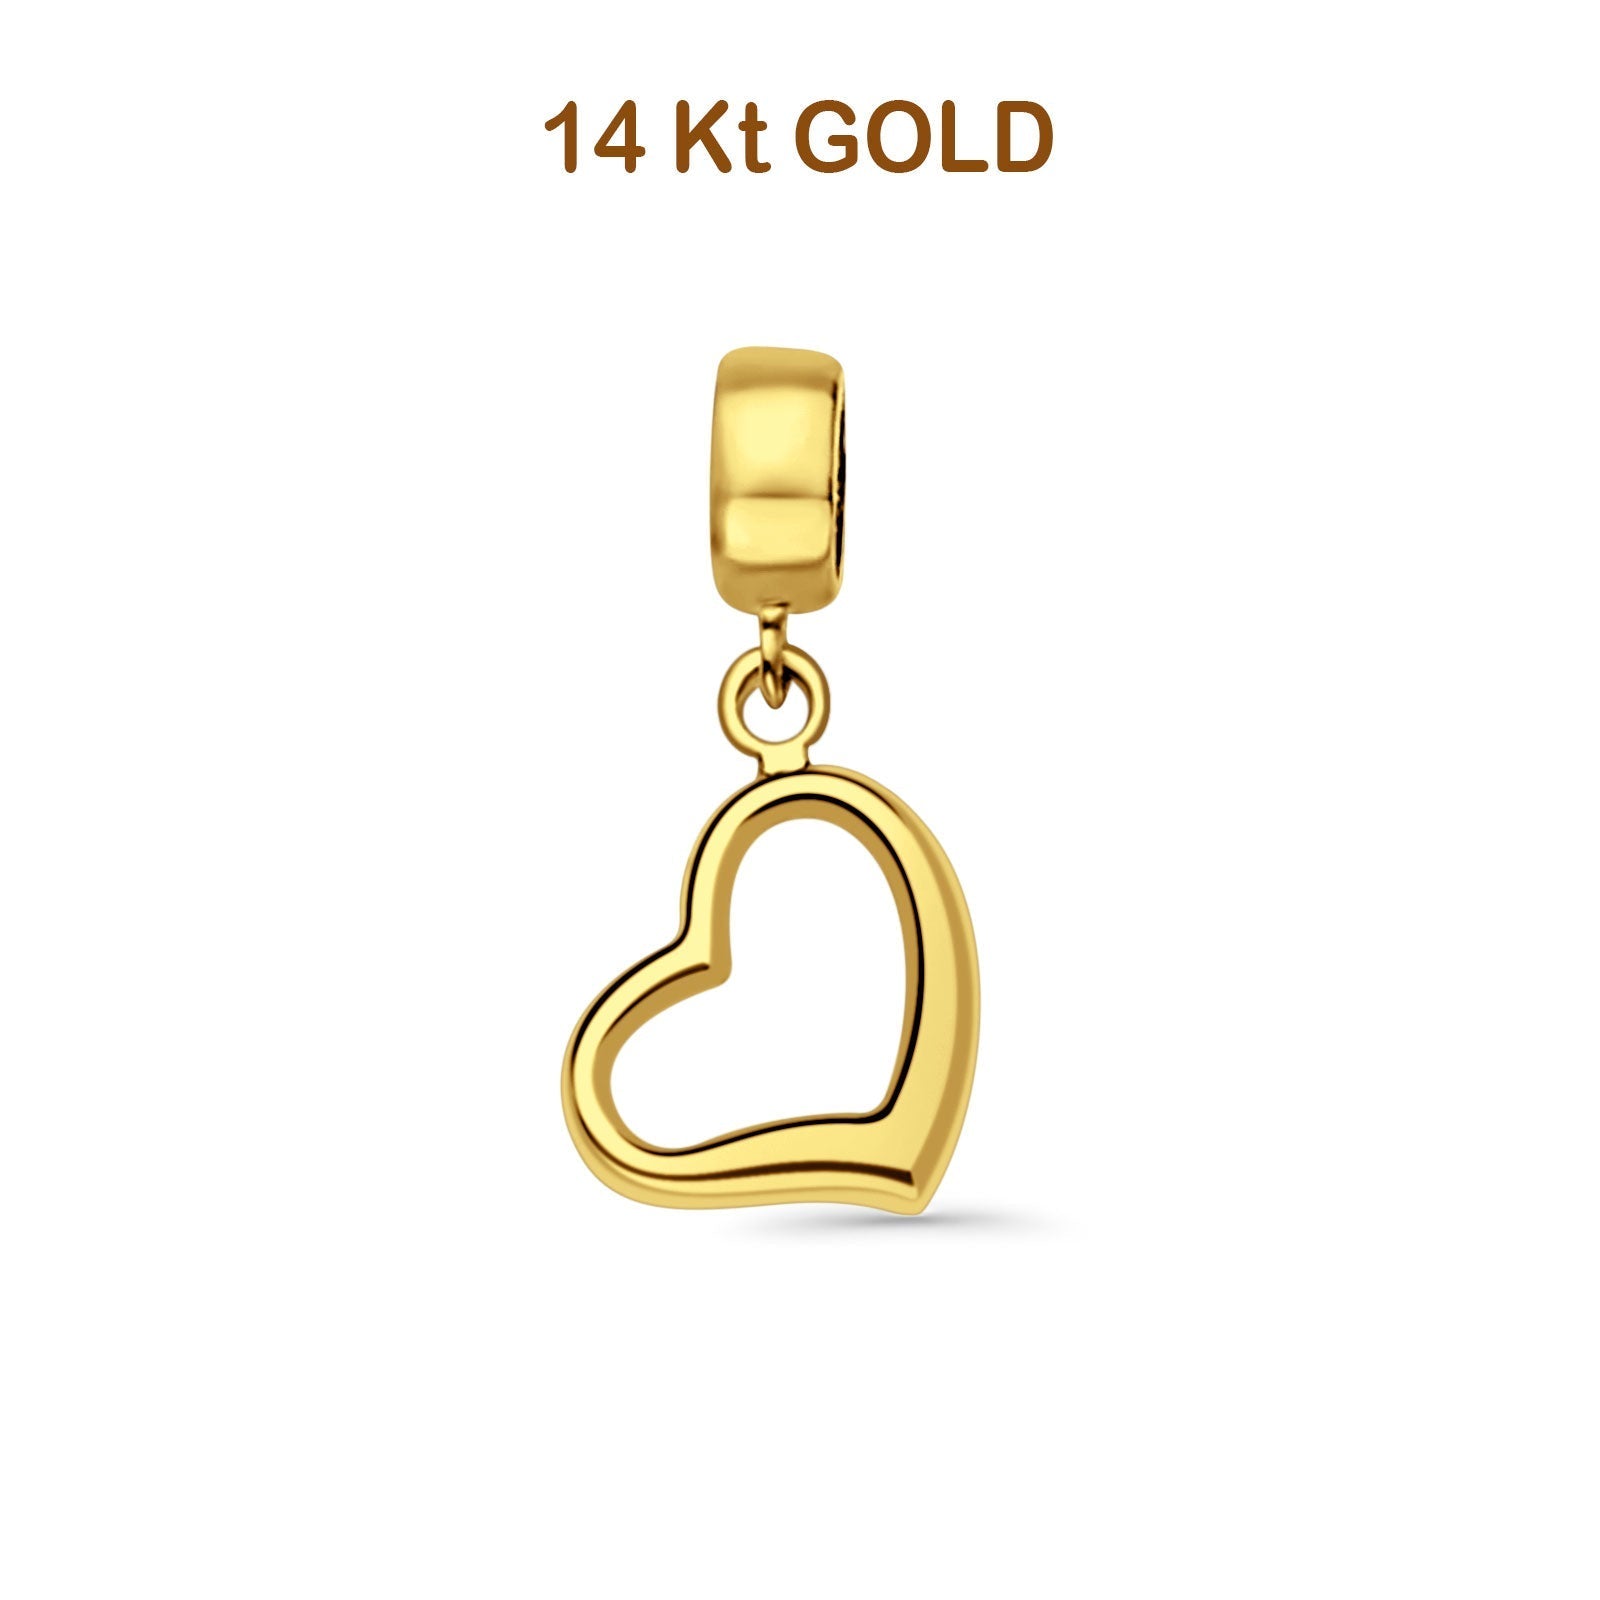 14K Yellow Gold Heart Charm for Mix&Match Pendant 21mmX10mm 0.7 grams